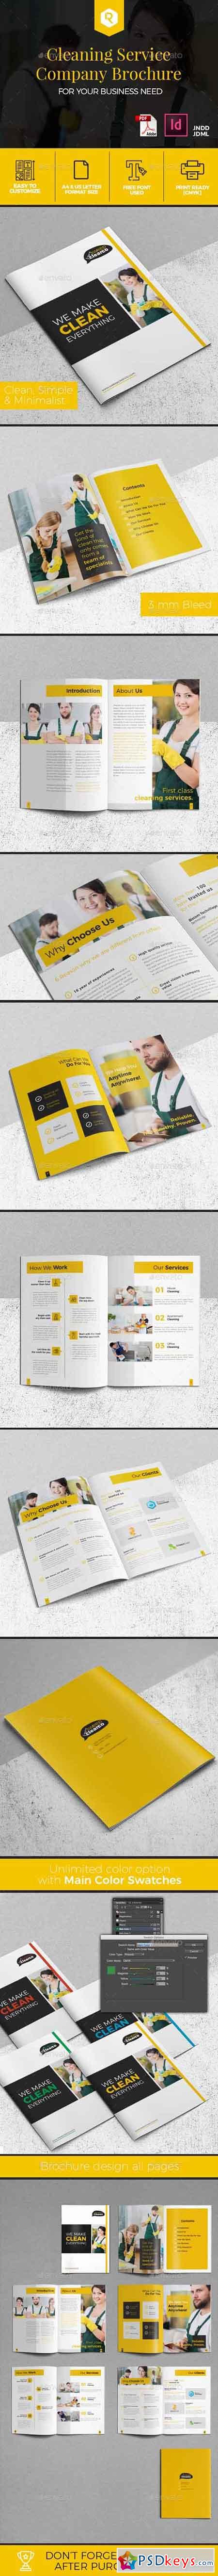 Cleaning Service Company Brochure 19578071